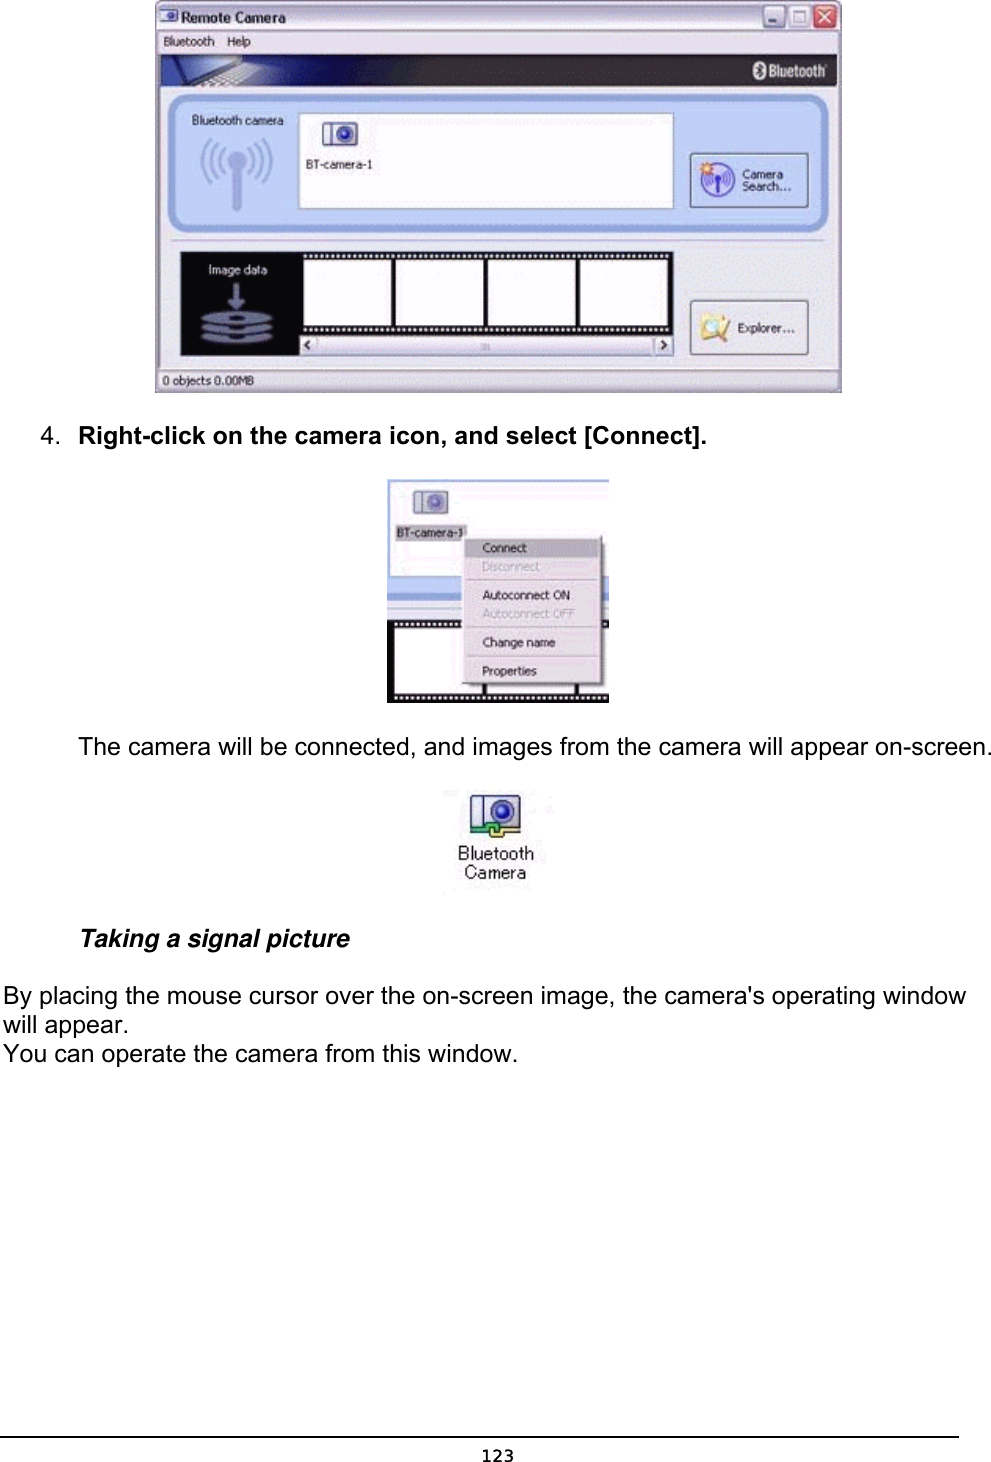   4.  Right-click on the camera icon, and select [Connect].        The camera will be connected, and images from the camera will appear on-screen.  Taking a signal picture By placing the mouse cursor over the on-screen image, the camera&apos;s operating window will appear.   You can operate the camera from this window.  123